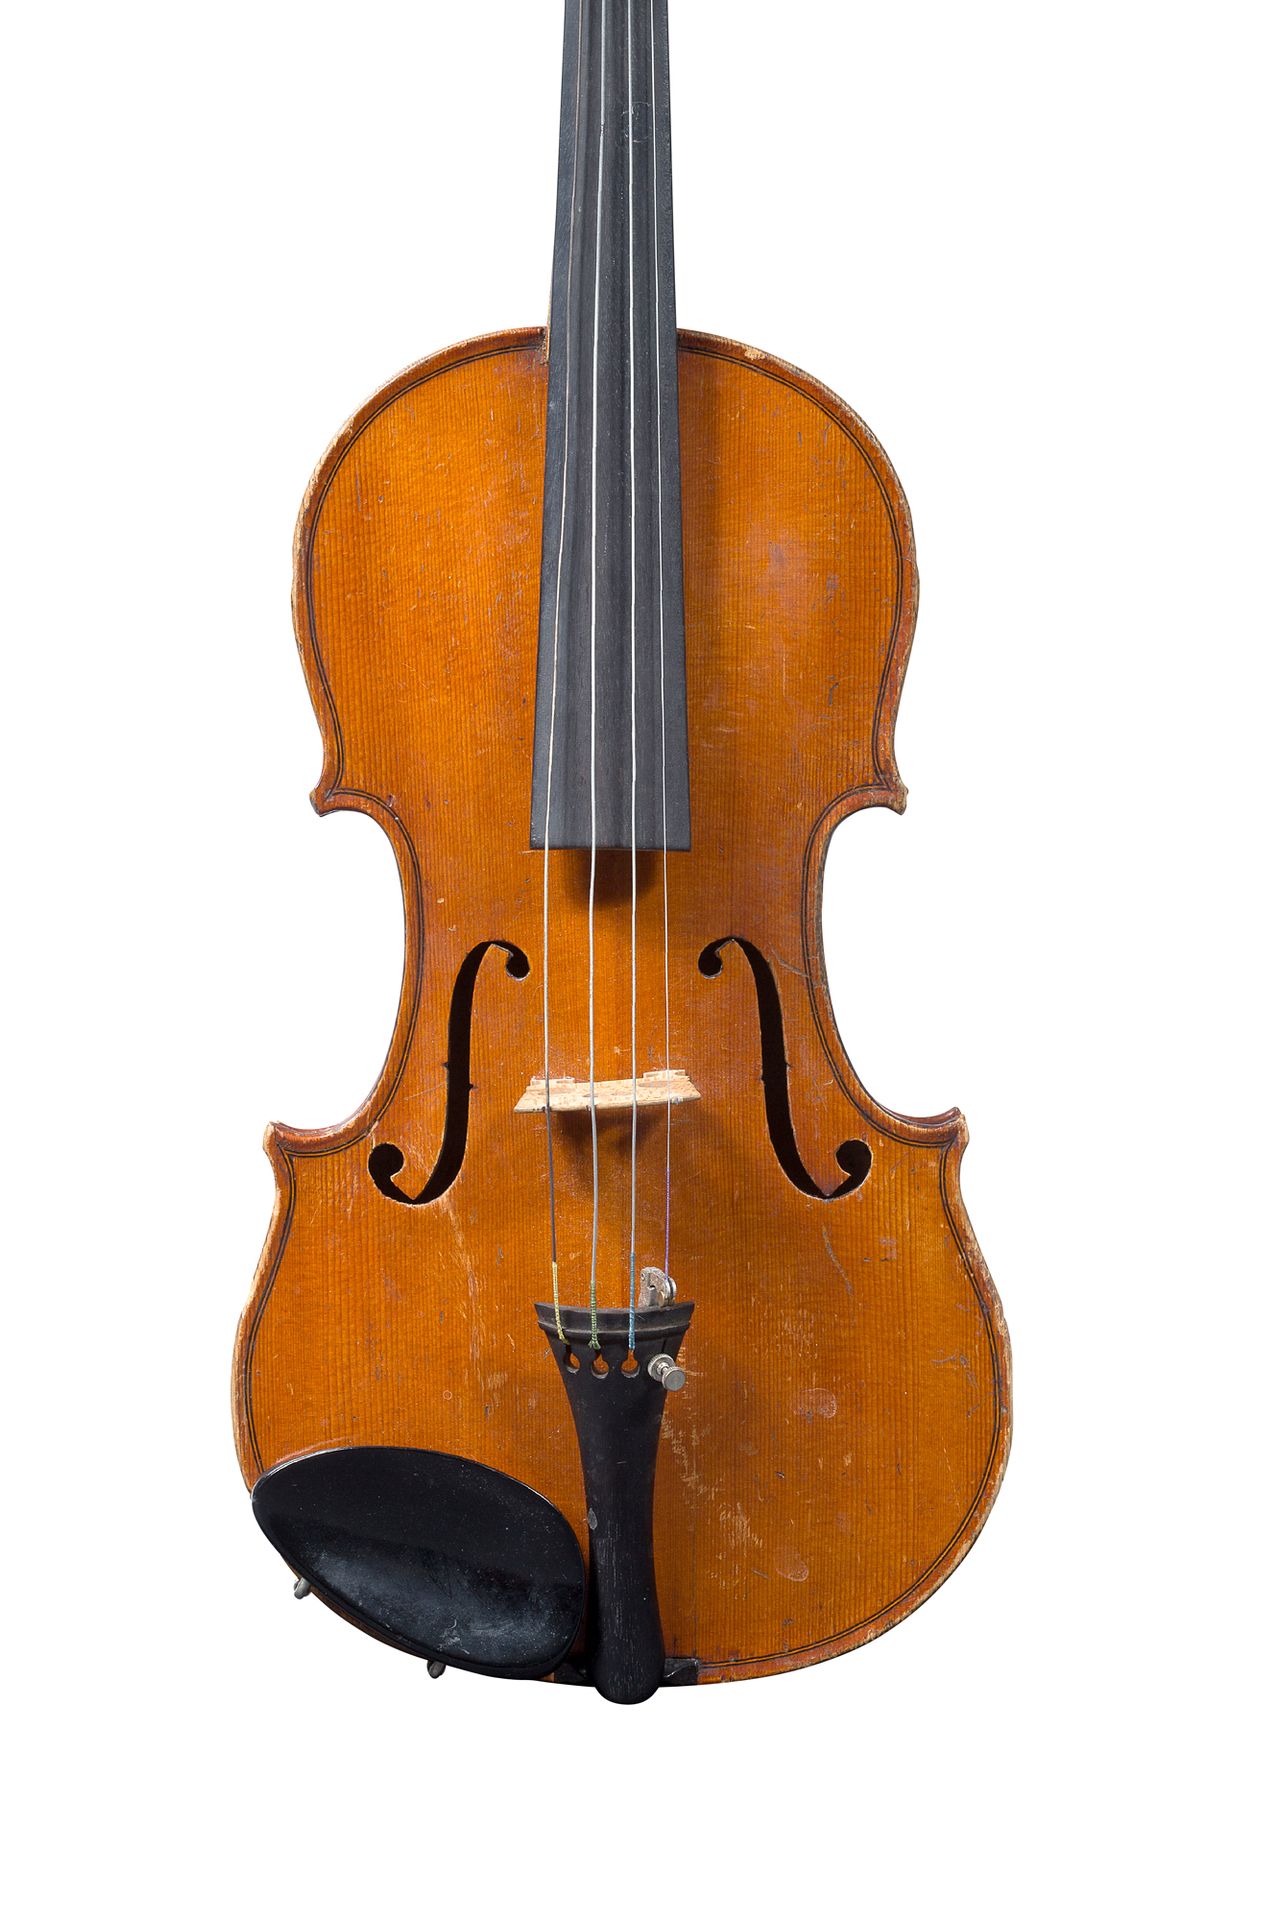 Null A 3/4 size French Violin, Mirecourt early 20th century